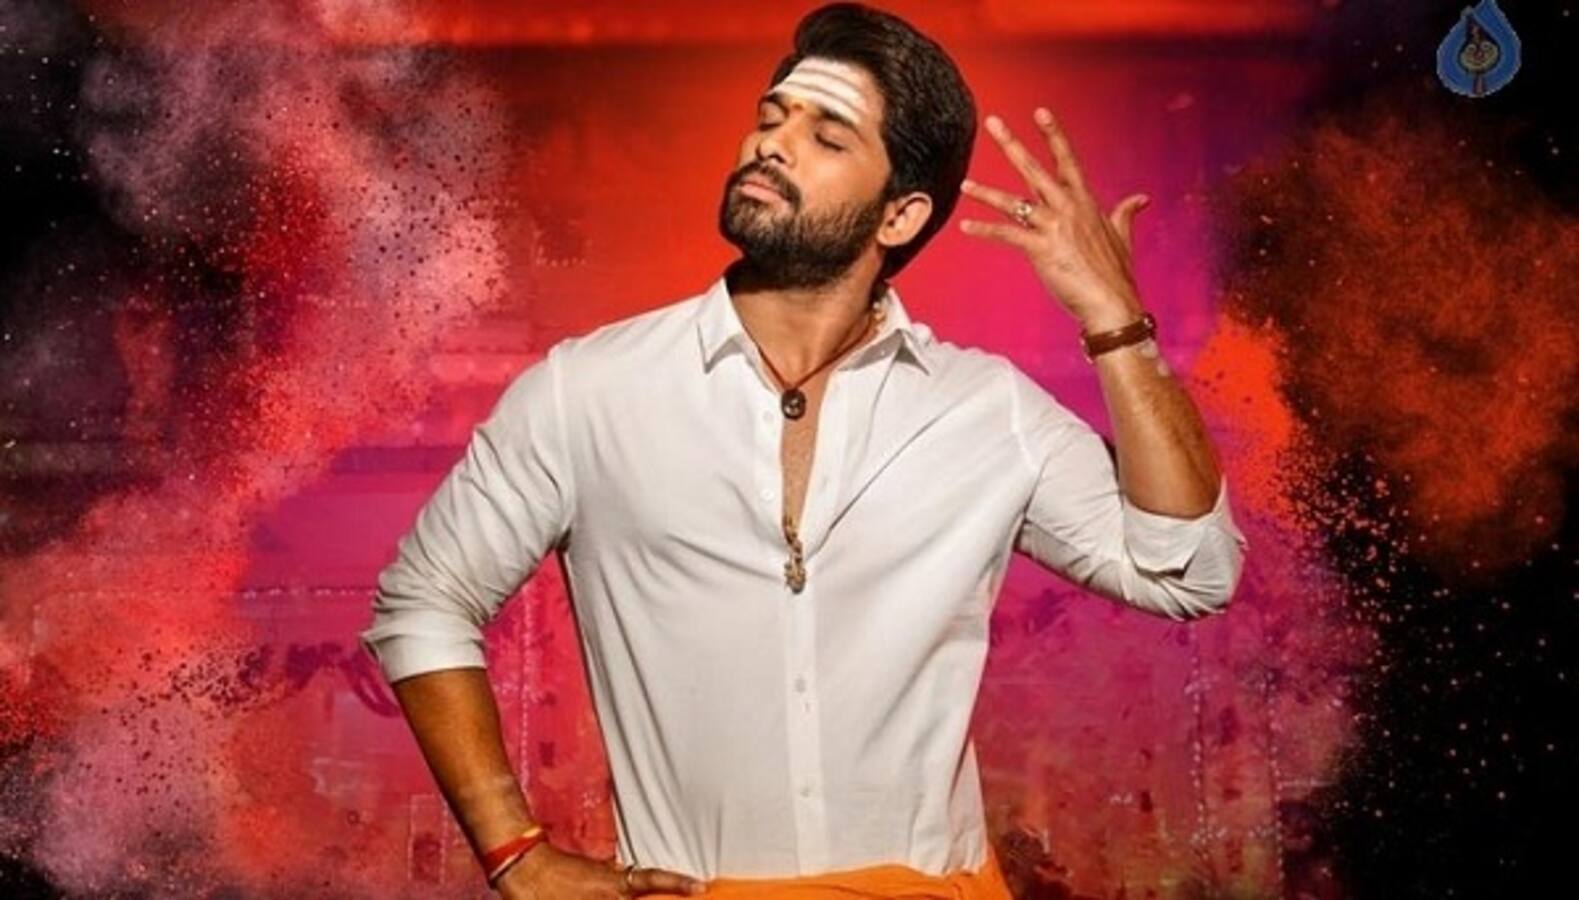 Allu Arjun's DJ clocks in a whopping 100M views on YouTube in the Hindi  version - Bollywood News & Gossip, Movie Reviews, Trailers & Videos at  